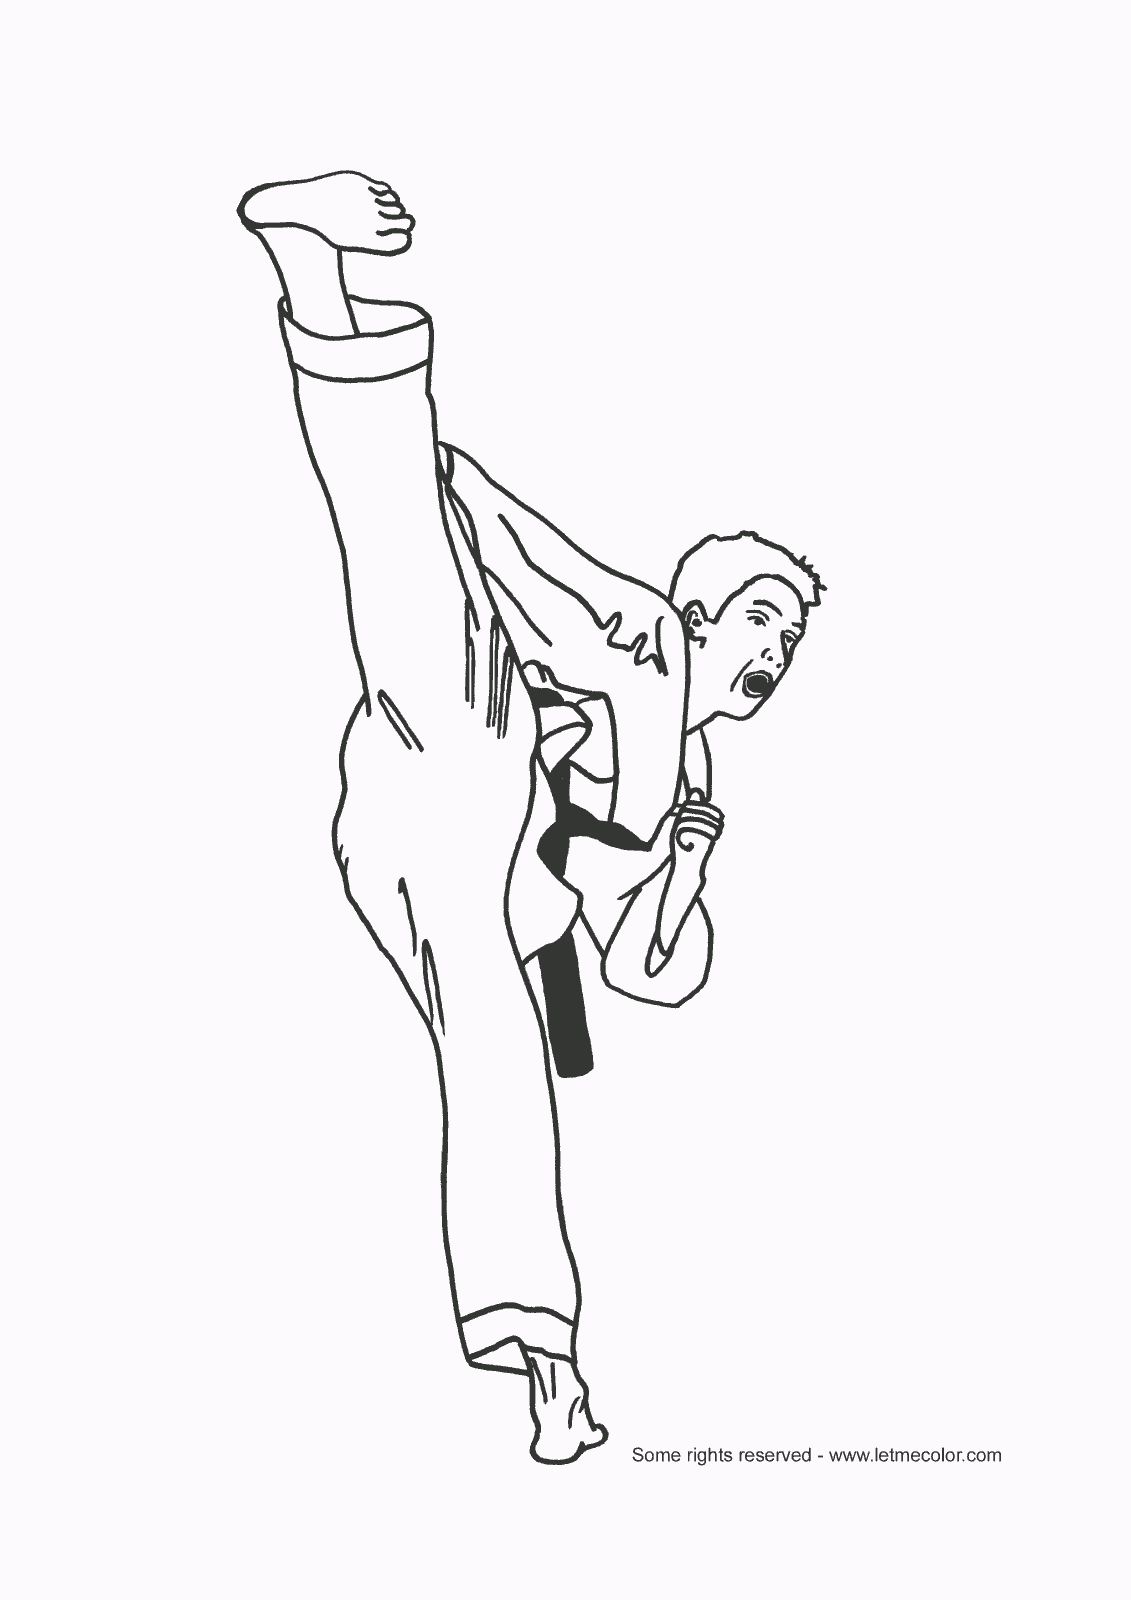 Karate Coloring Pages For Kids | Pose References | Coloring Pages - Free Printable Karate Coloring Pages